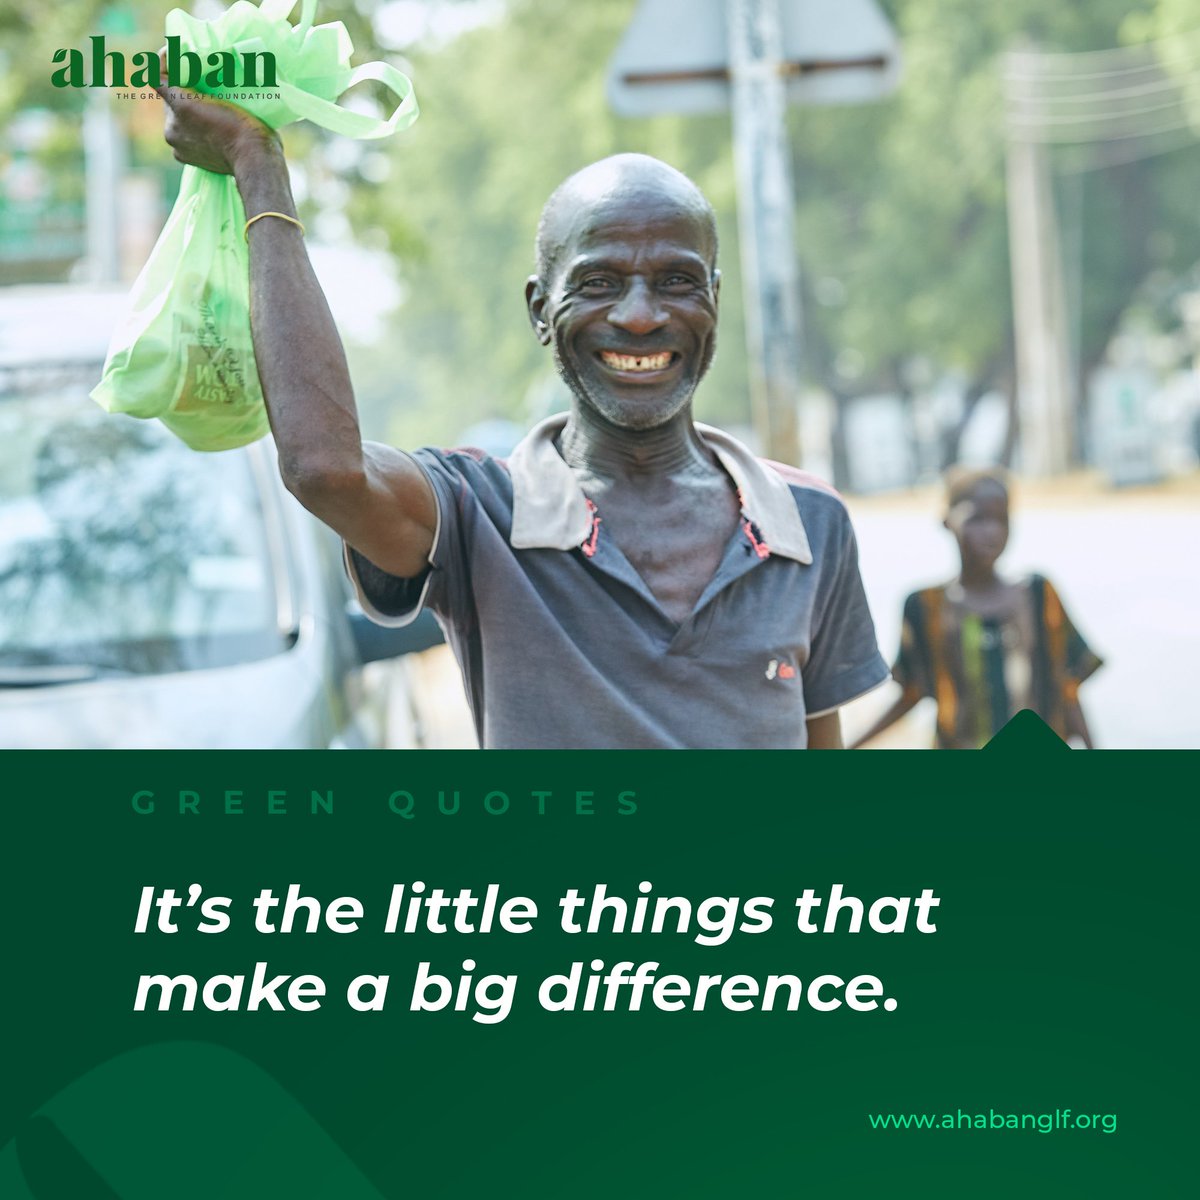 It's the little things that make a big difference. 

Let's do more 🍃 

#GreenQuotes #AhabanMobileShelter #AhabanGLF